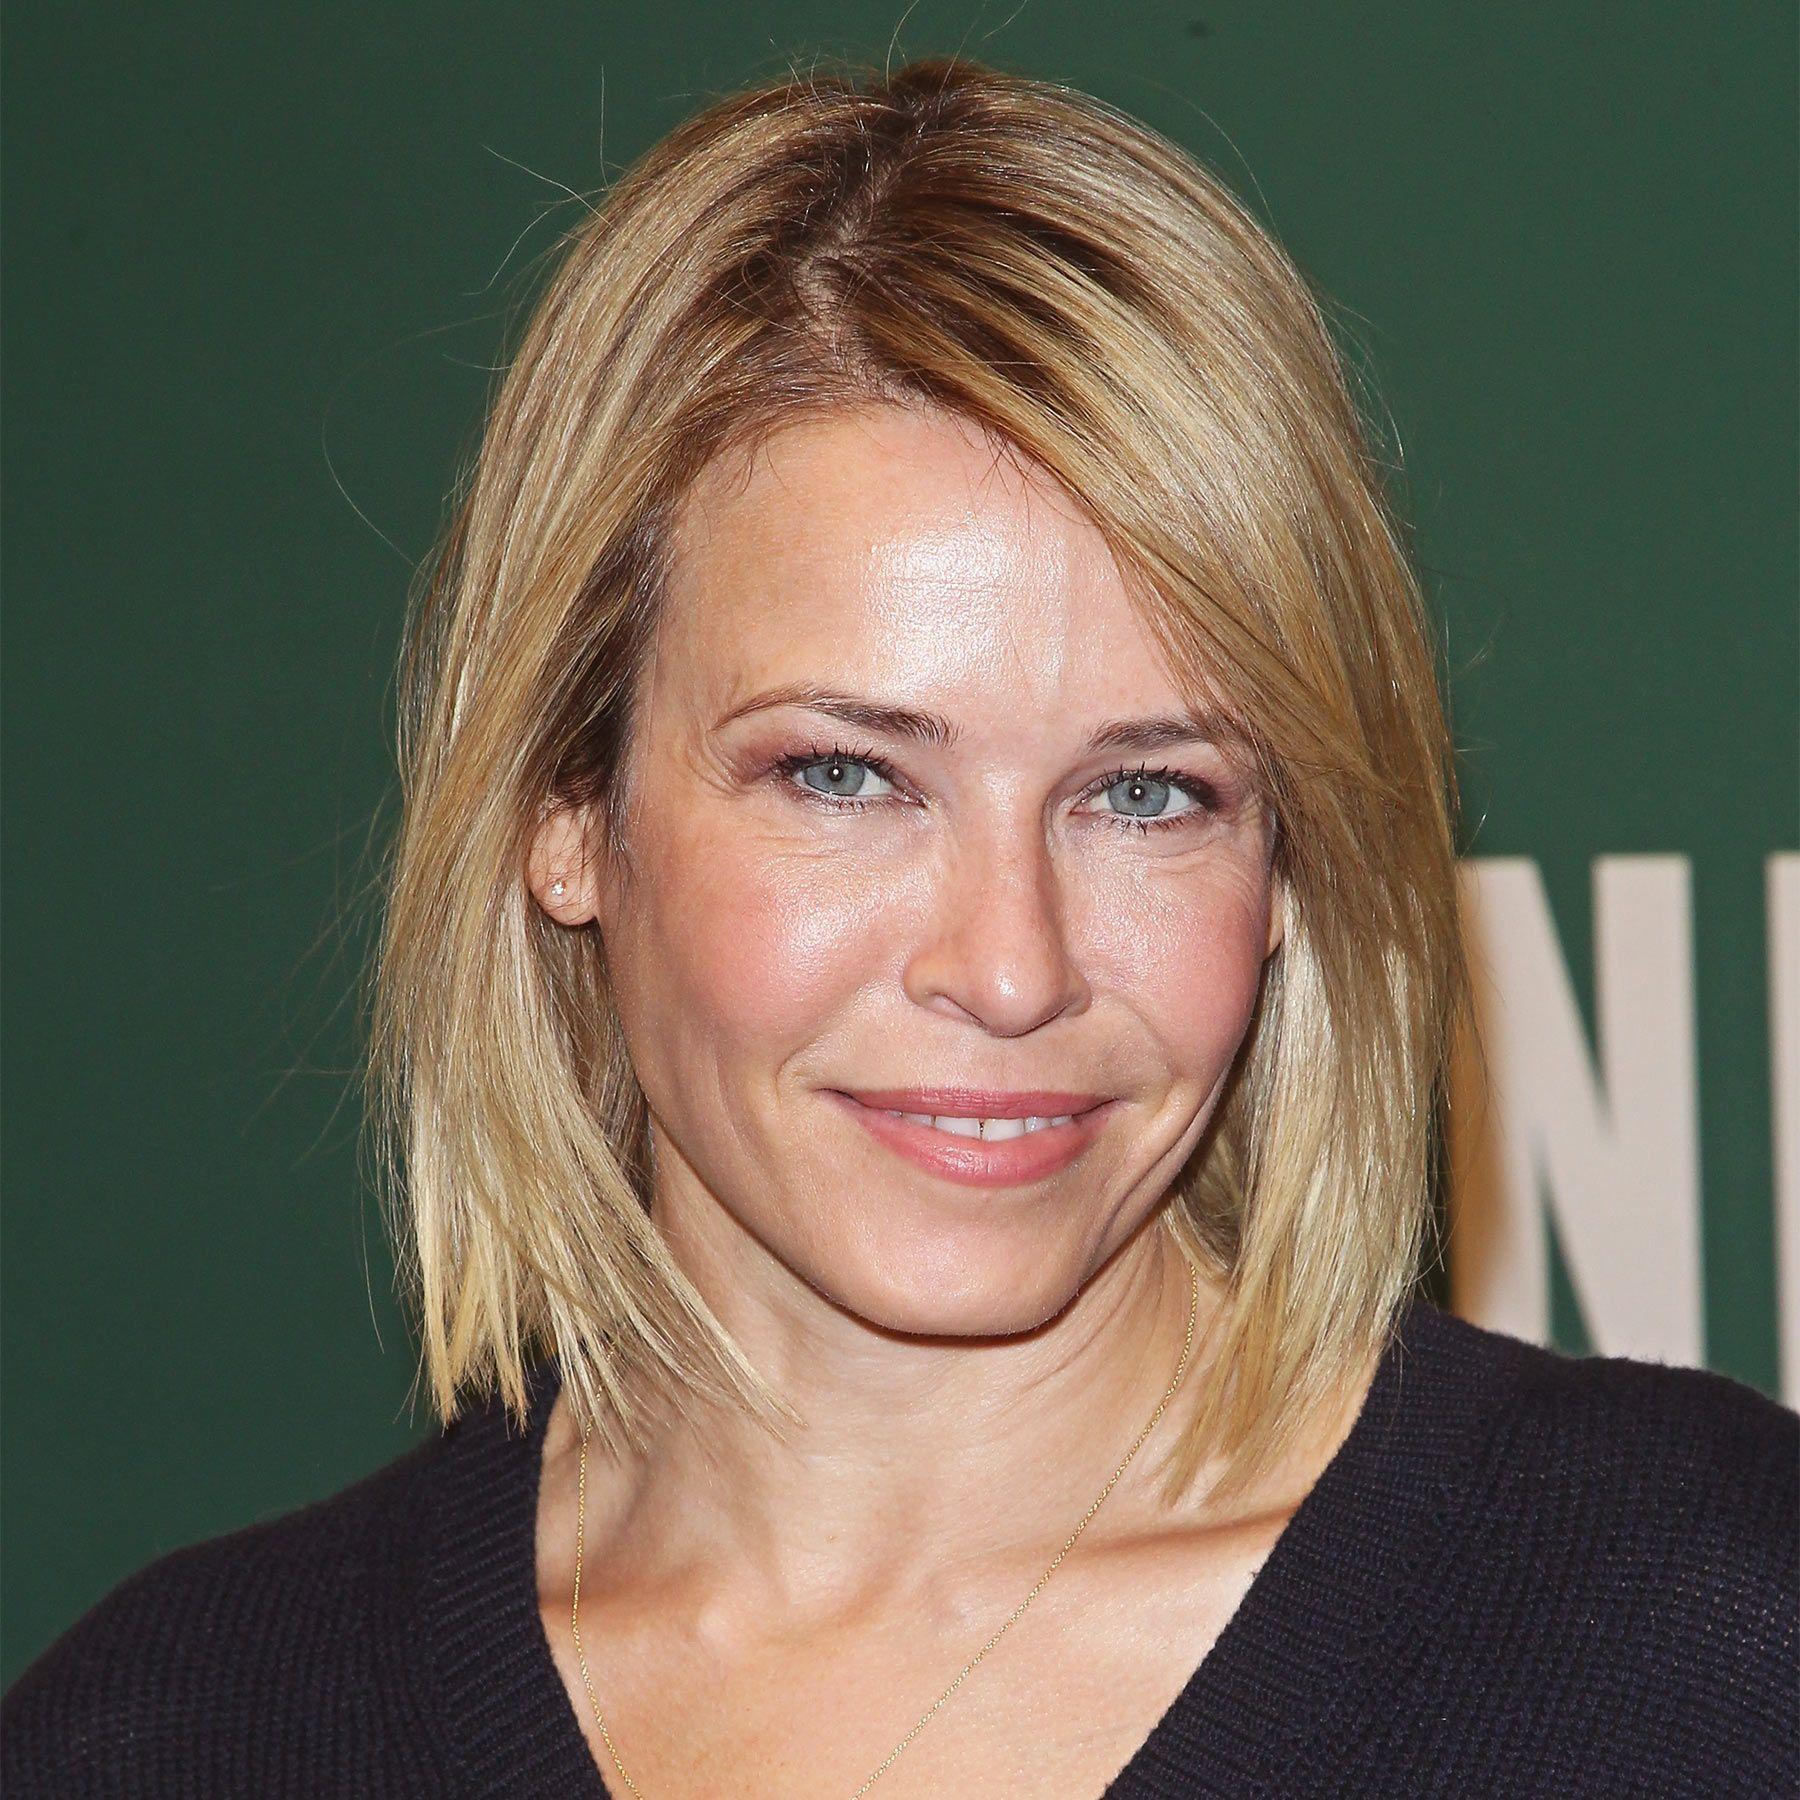 Bye Chuy! Chelsea Handler to End Chelsea Lately After Eight Years